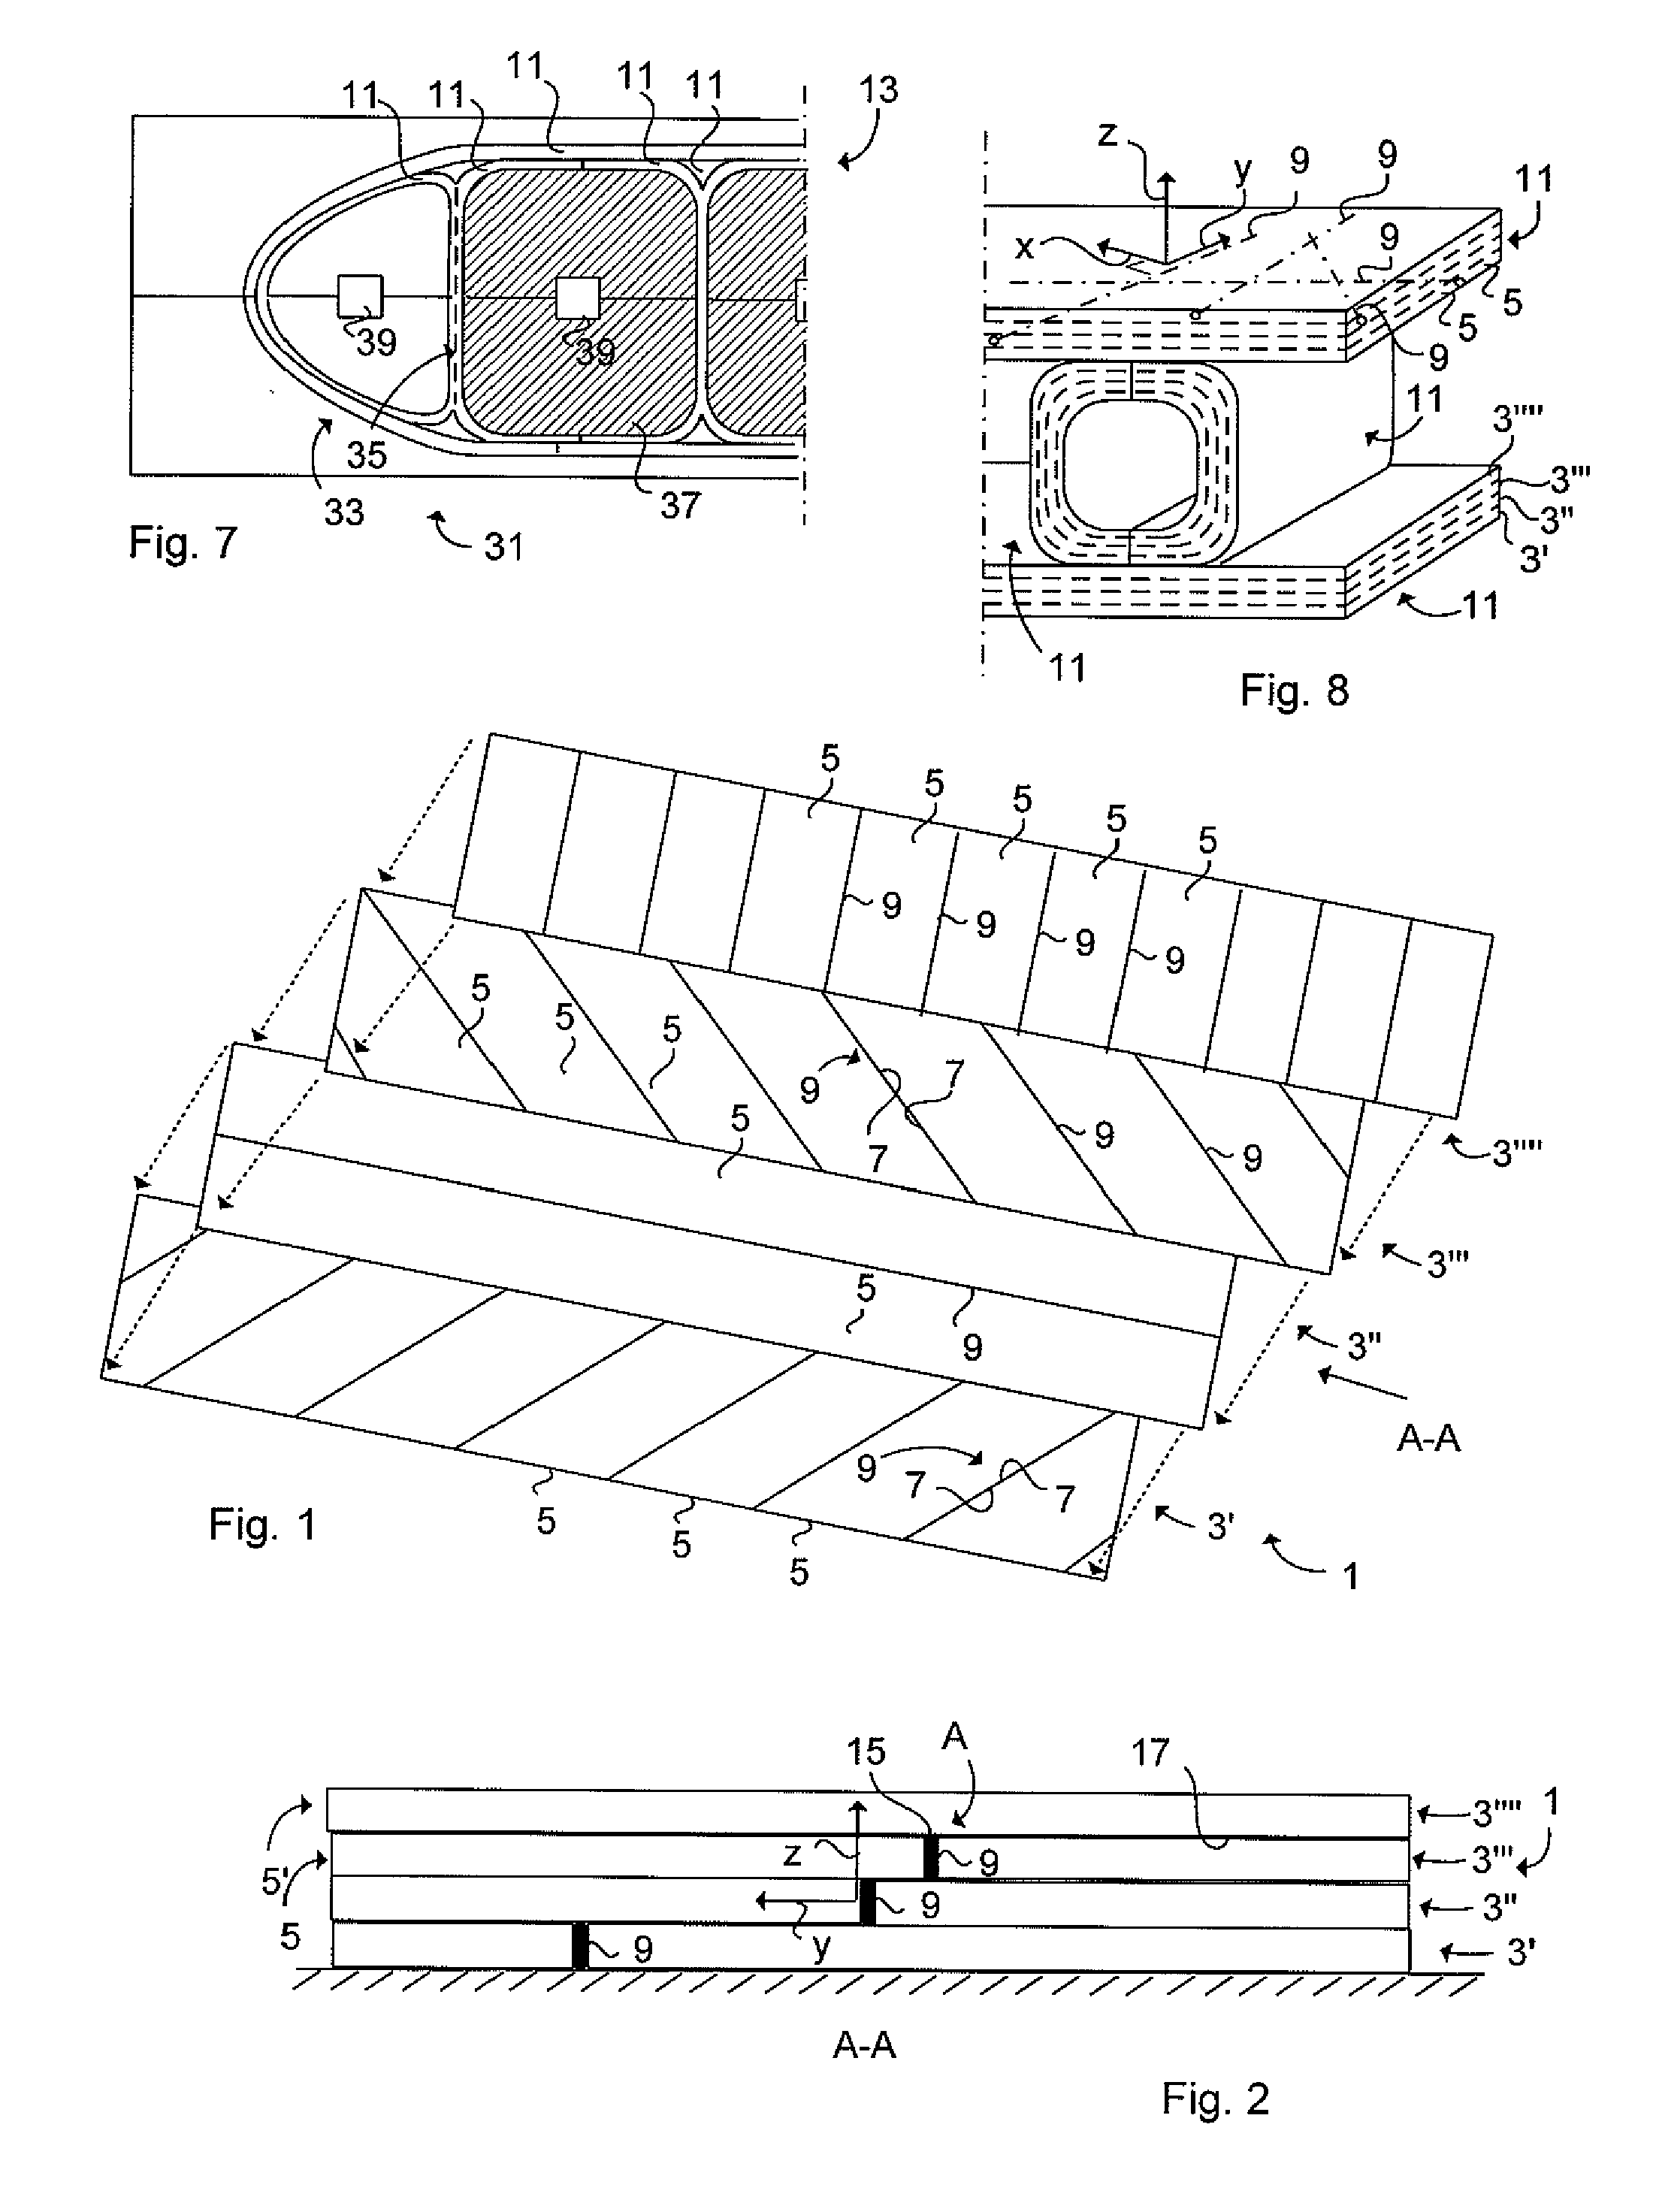 Structural longitudinal composite joint for aircraft structure